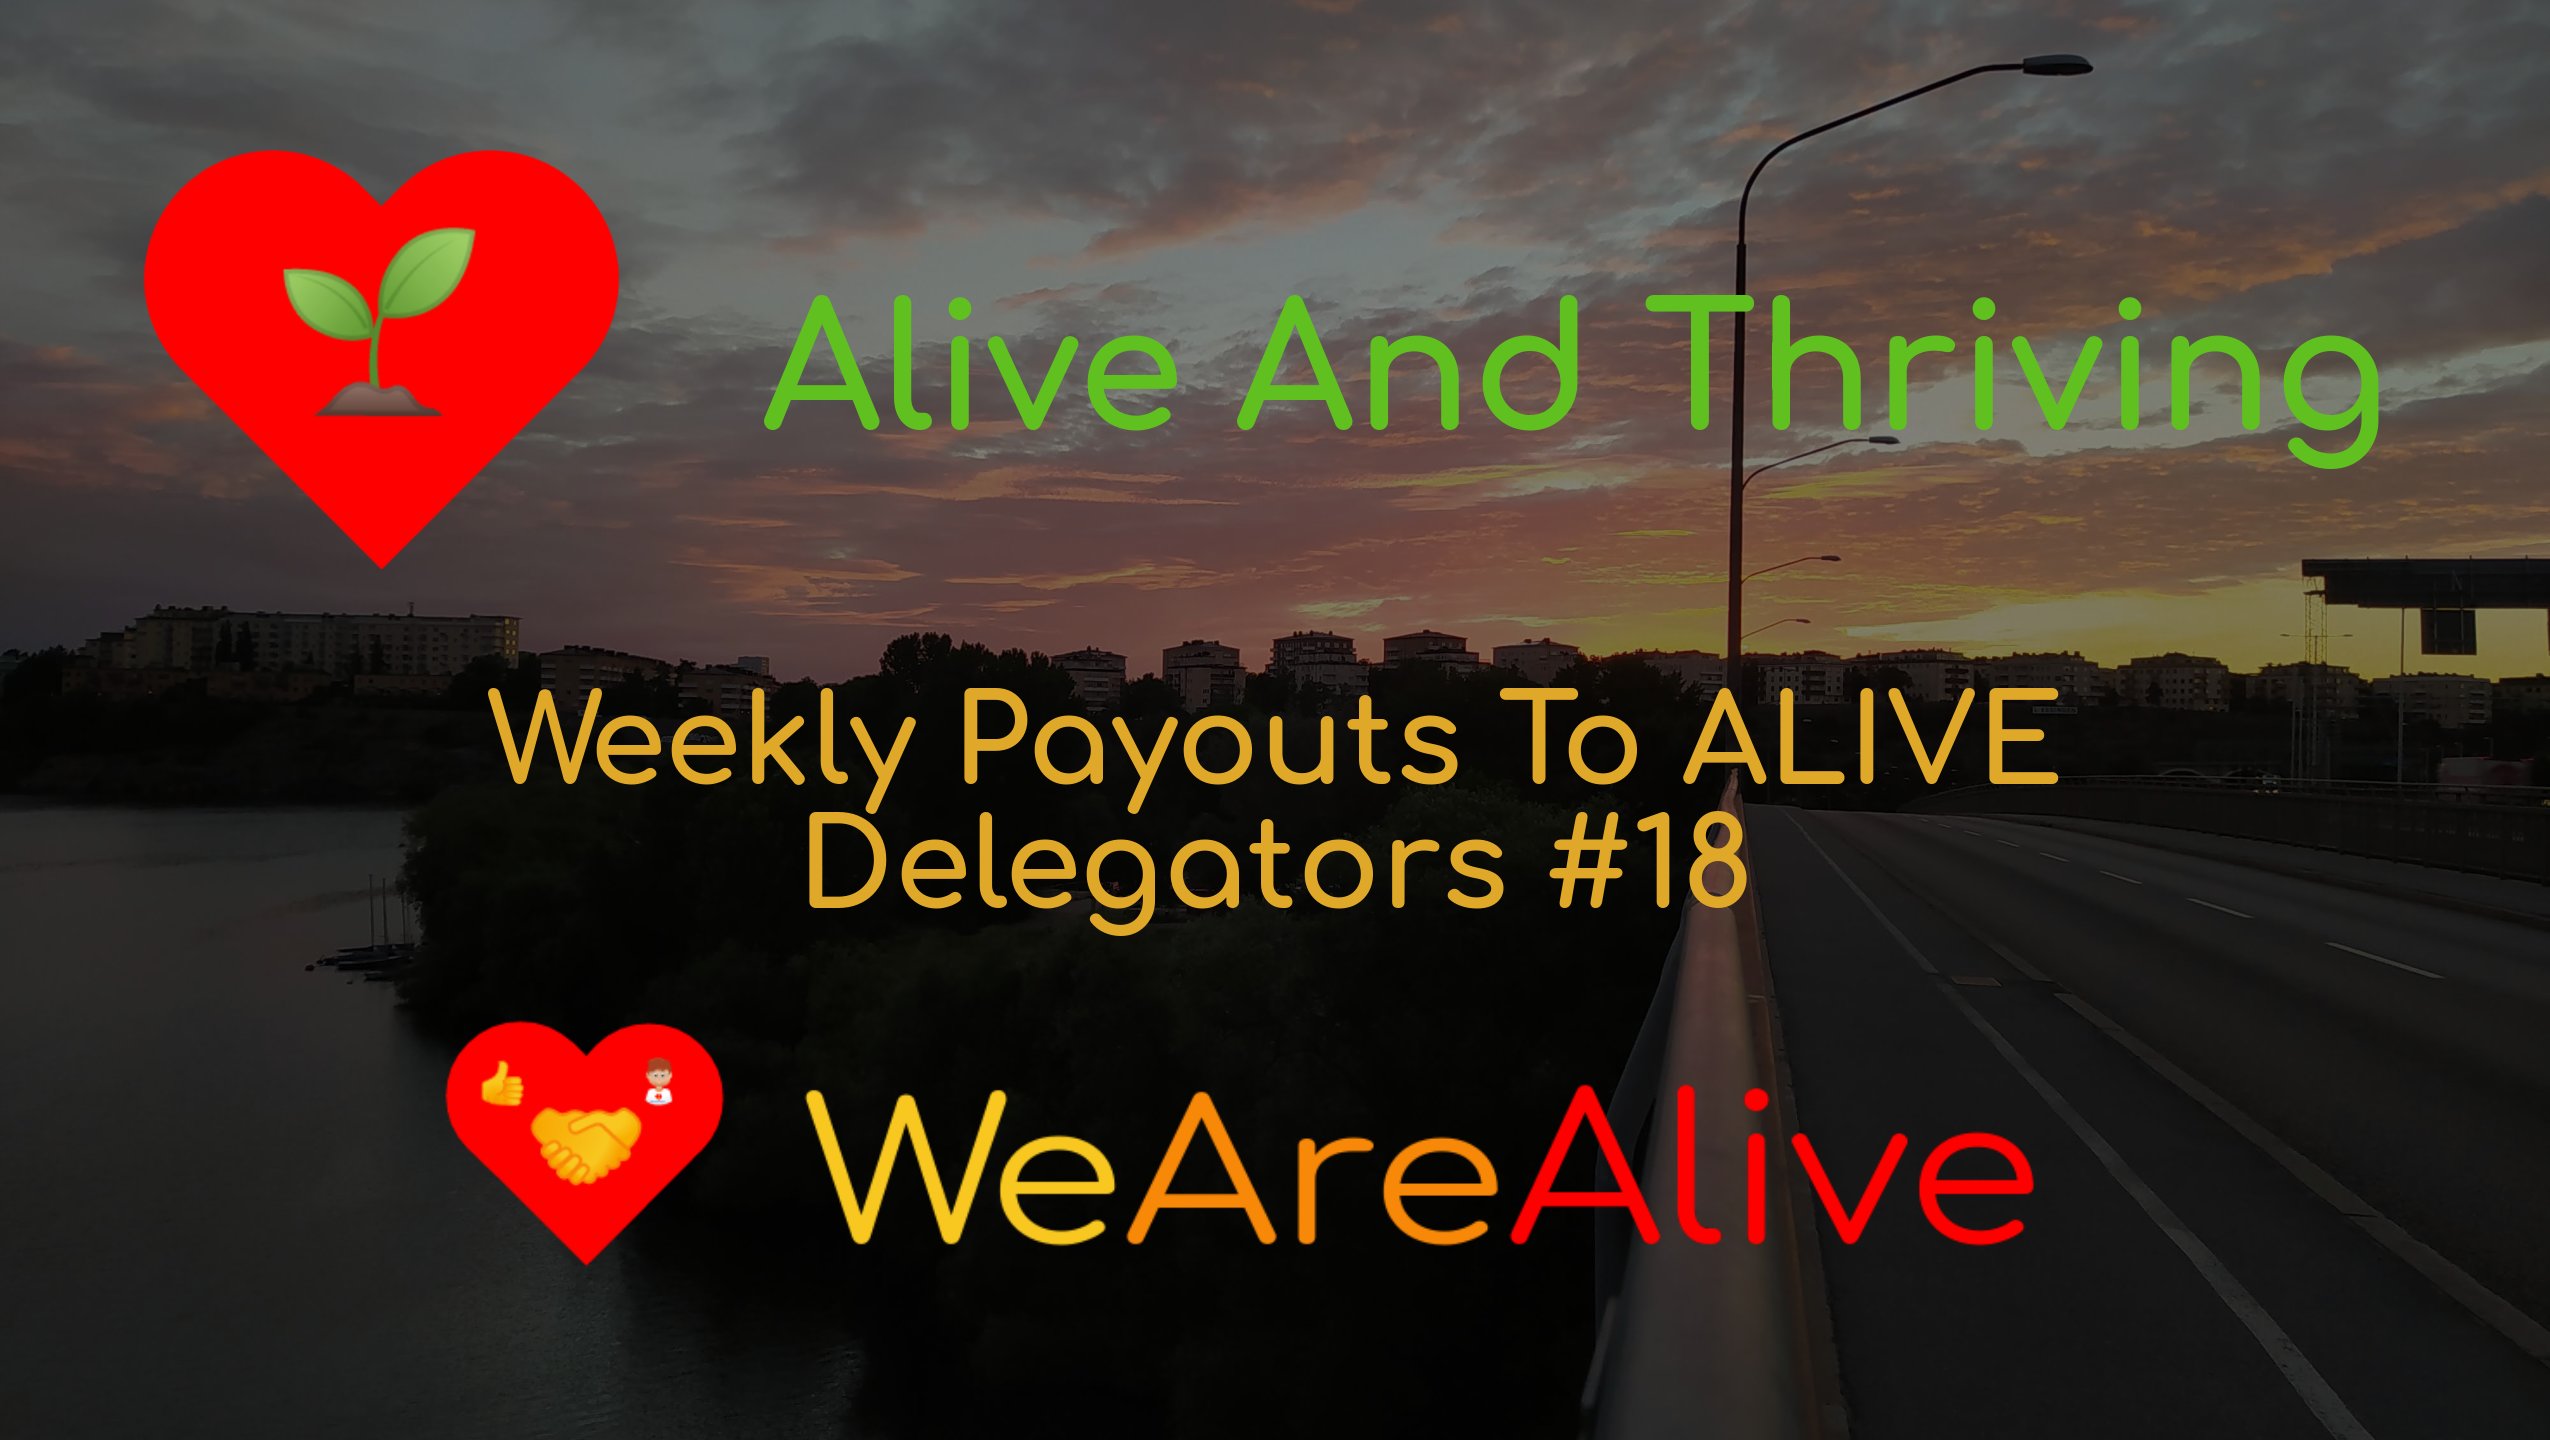 @wearealive/alive-and-thriving-weekly-payouts-to-alive-delegators-18